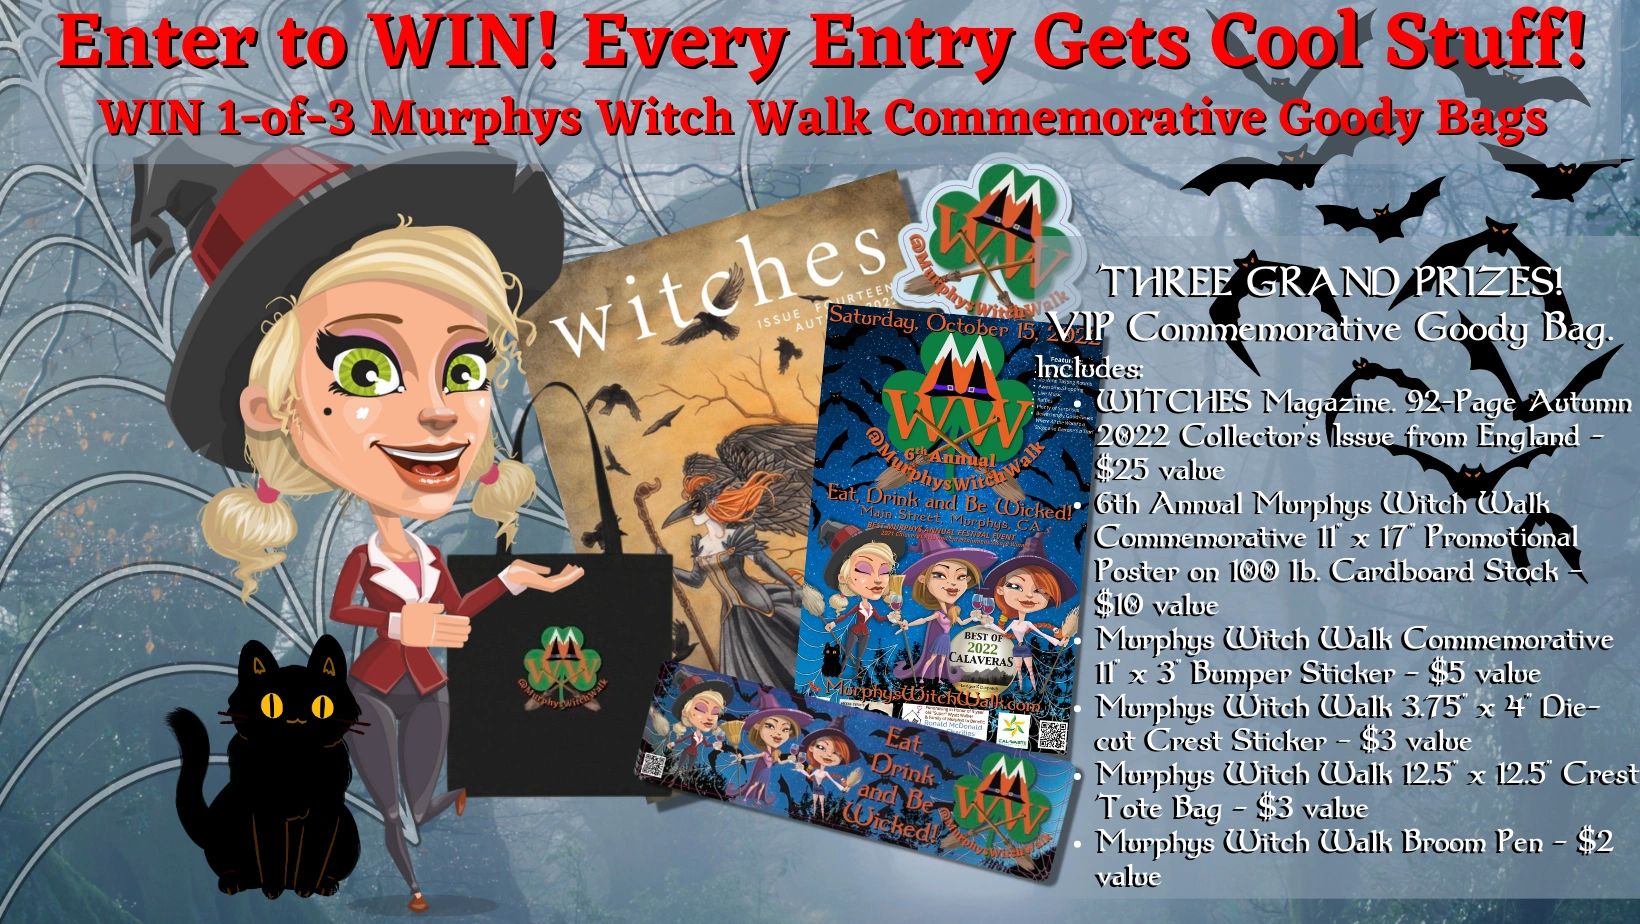 Vote for the Murphys Witch Walk and Get Really Cool FREE Gifts